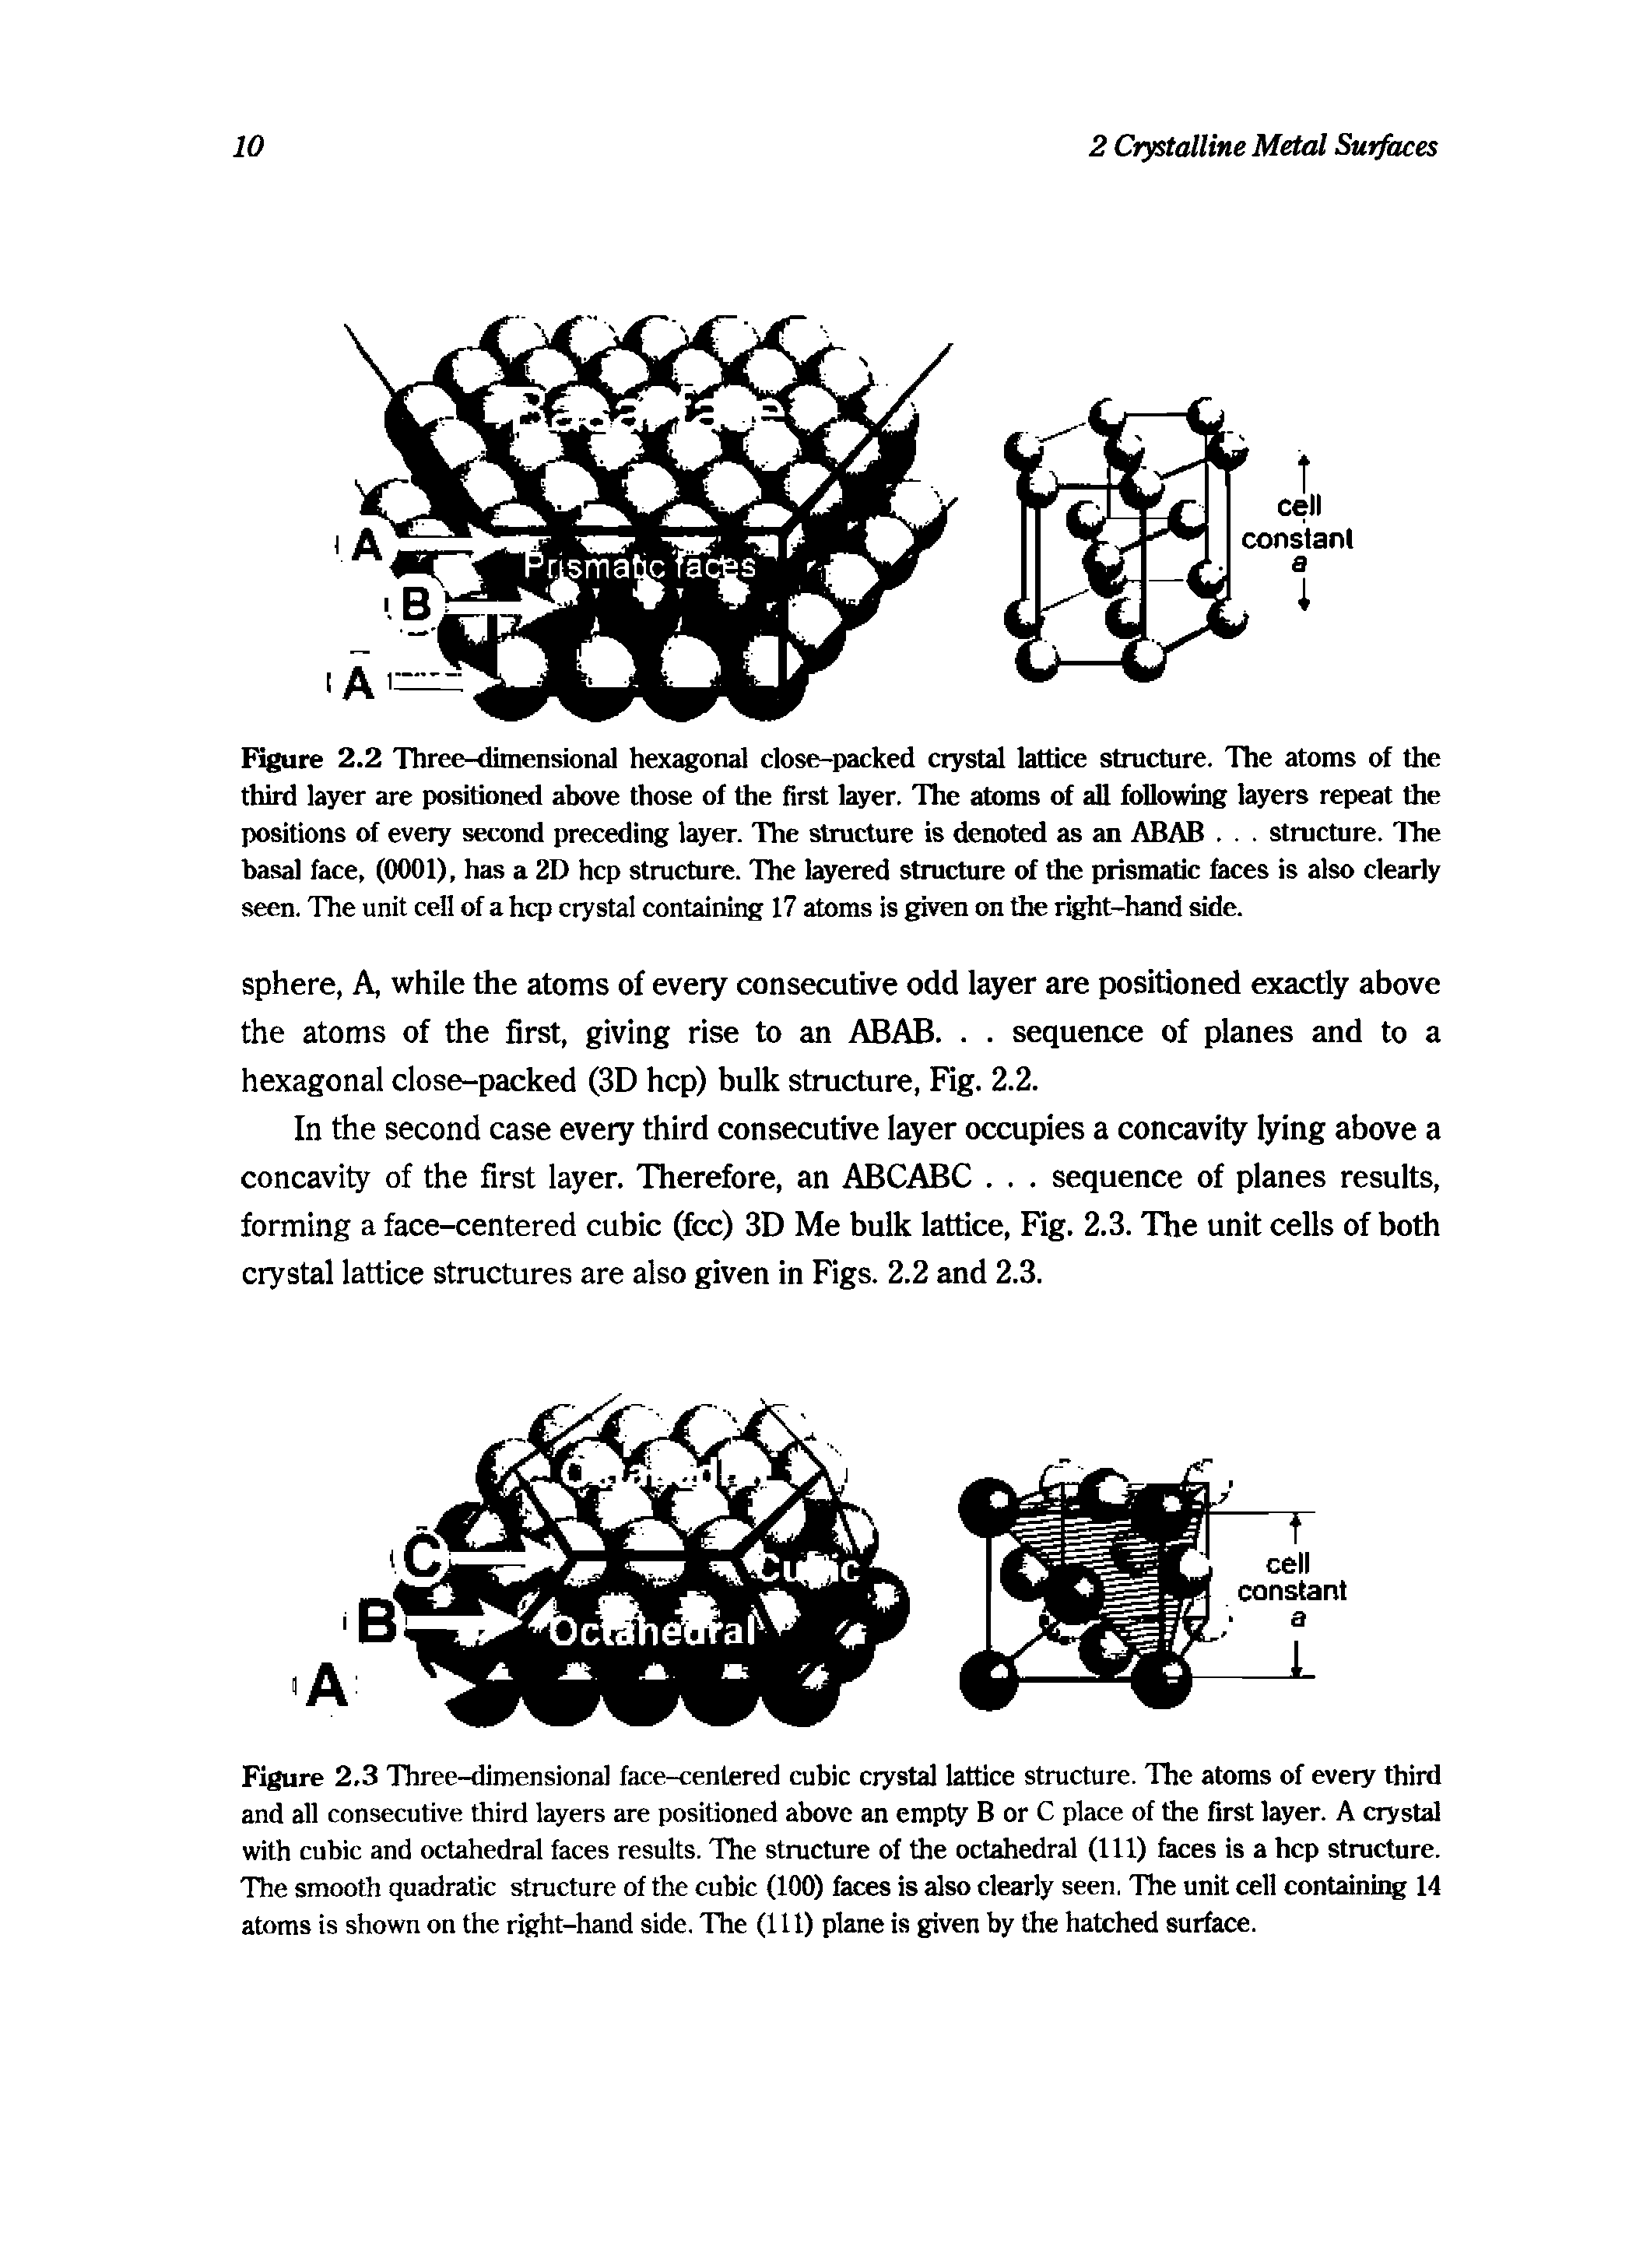 Figure 2.2 Three-dimensional hex onal close-packed crystal lattice structure. The atoms of the third layer are positioned above those of the first layer. The atoms of all following layers repeat the positions of every second preceding layer. The structure is denoted as an ABAB. . . structure. The basal face, (0001), has a 2D hep structure. The layered structure of the prismatic faces is also clearly seen. The unit cell of a hep crystal containing 17 atoms is given on the r ht-hand side.